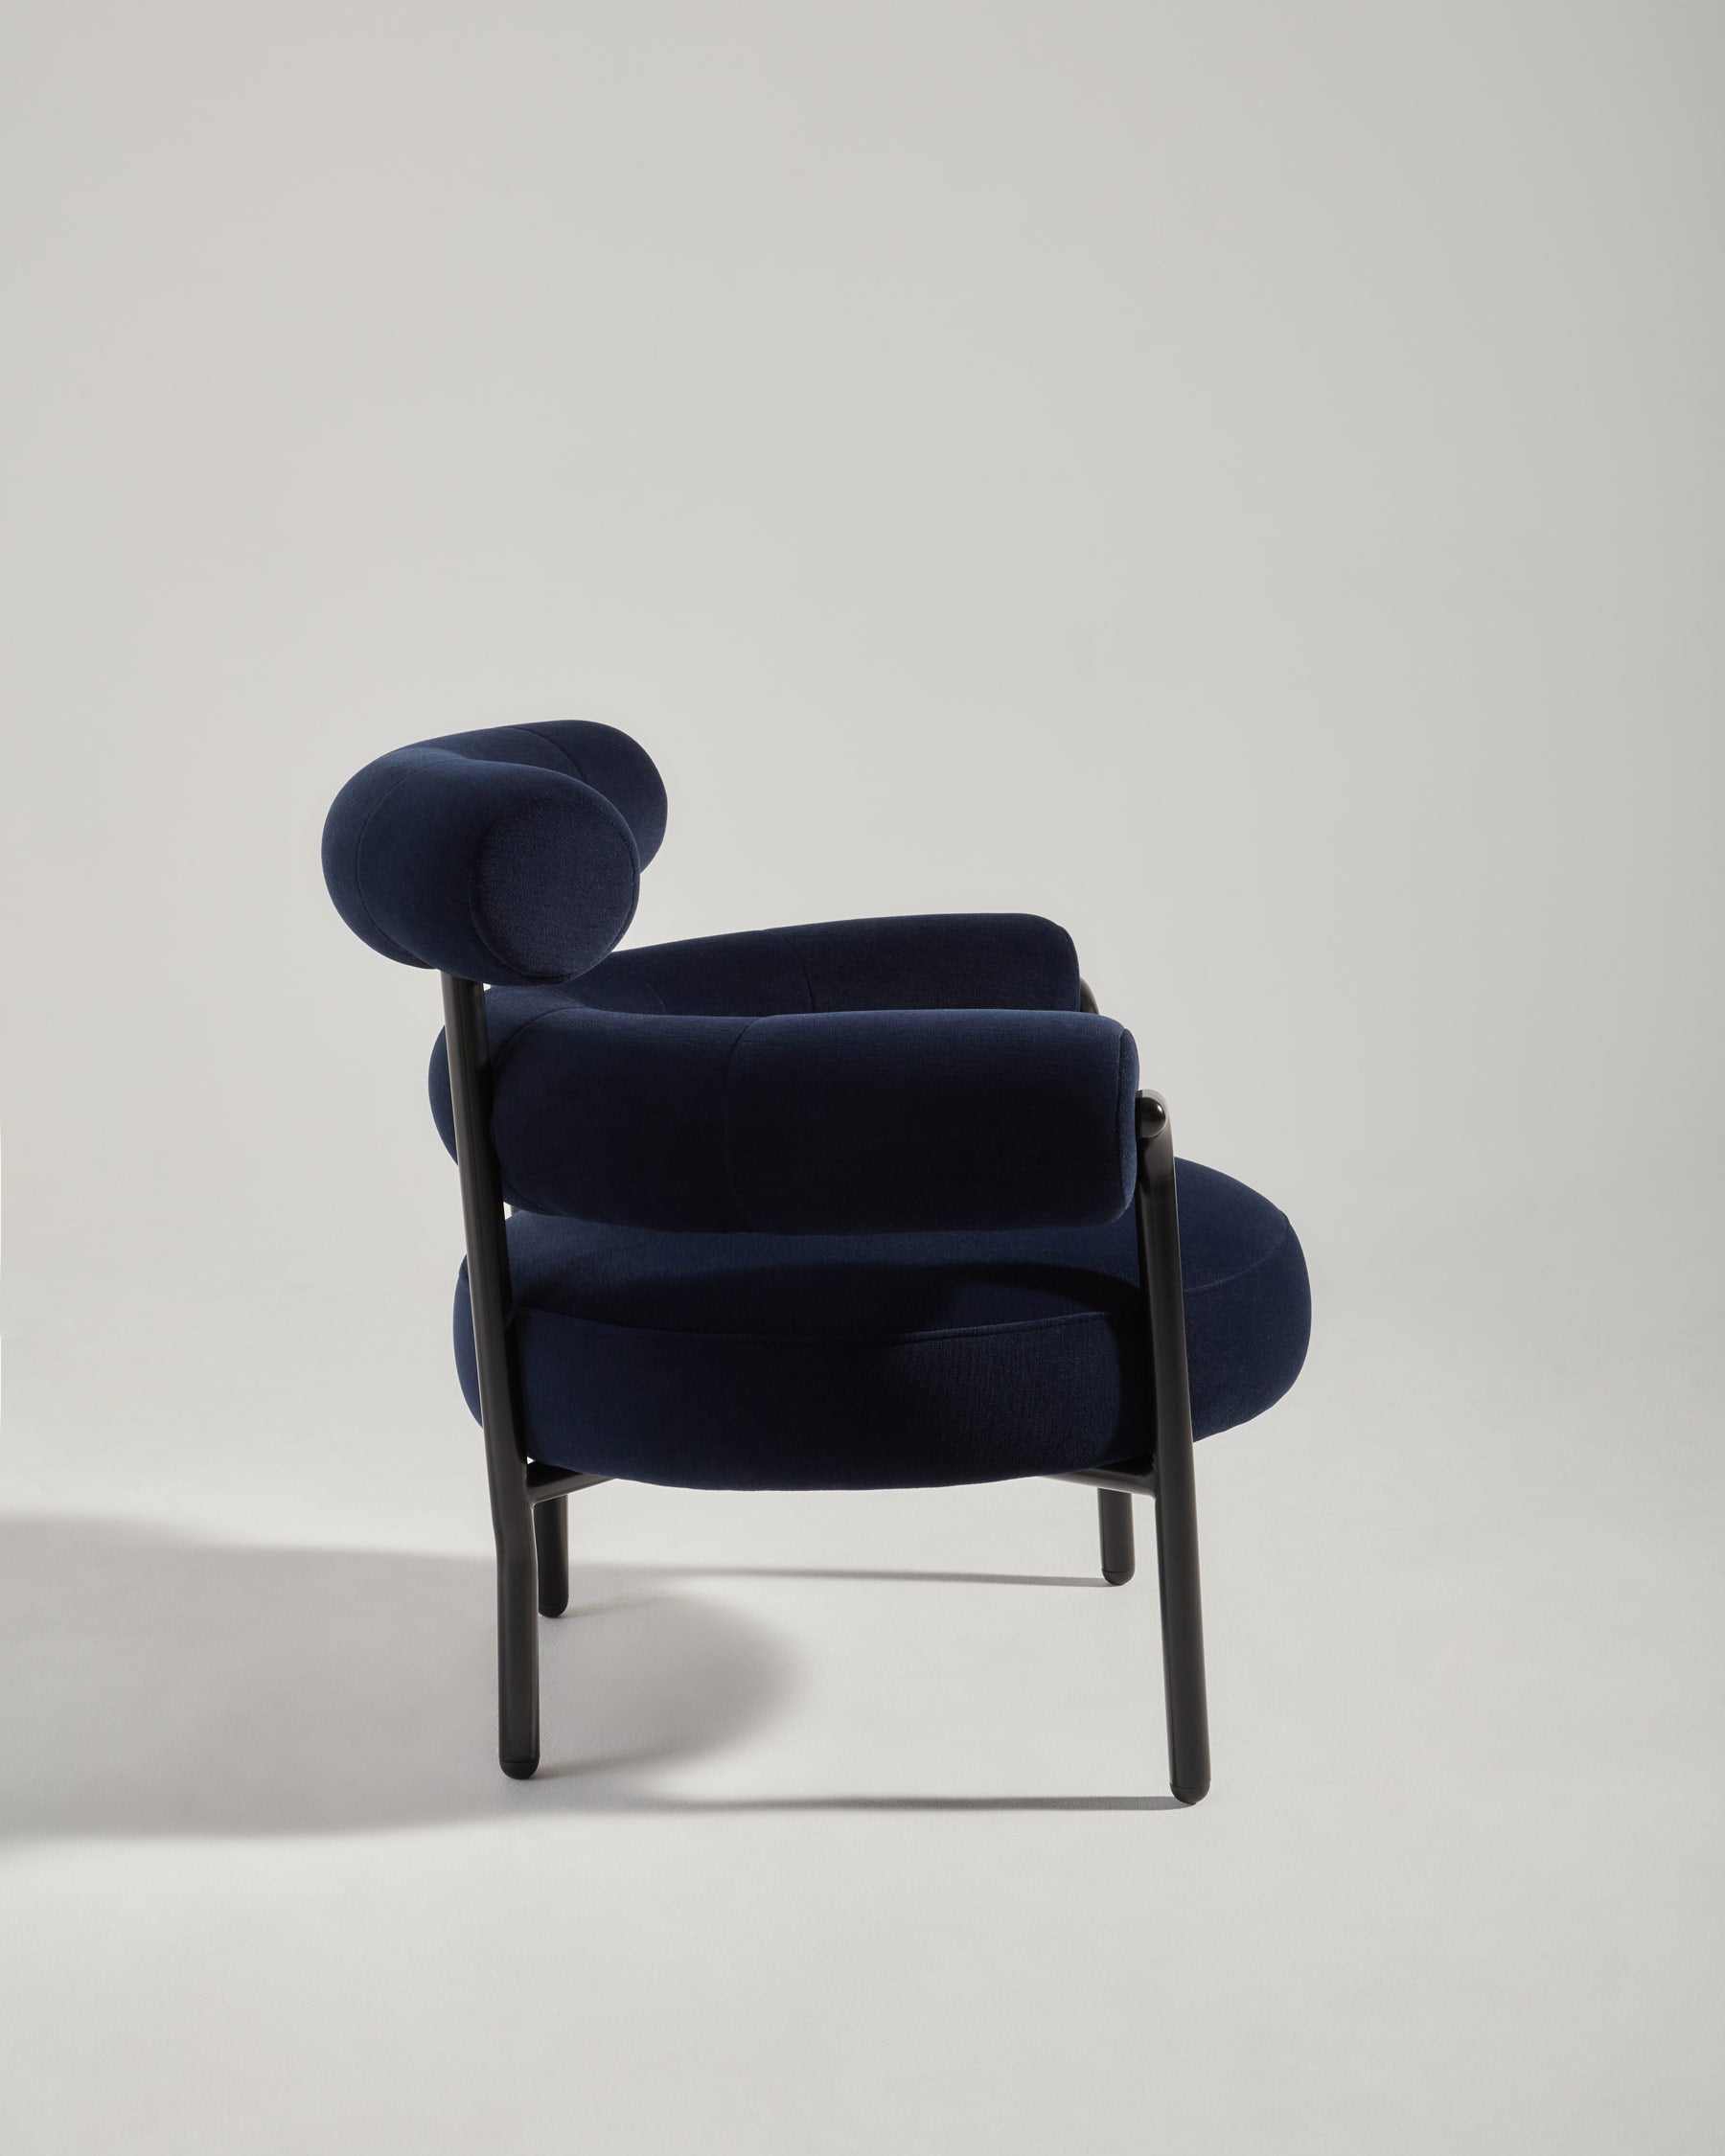 Olio Armchair by Christina Bricknell and Gibson Karlo | Round Upholstered Chair Steel Frame | DesignByThem  ** HF7 Gentle 2 - 783